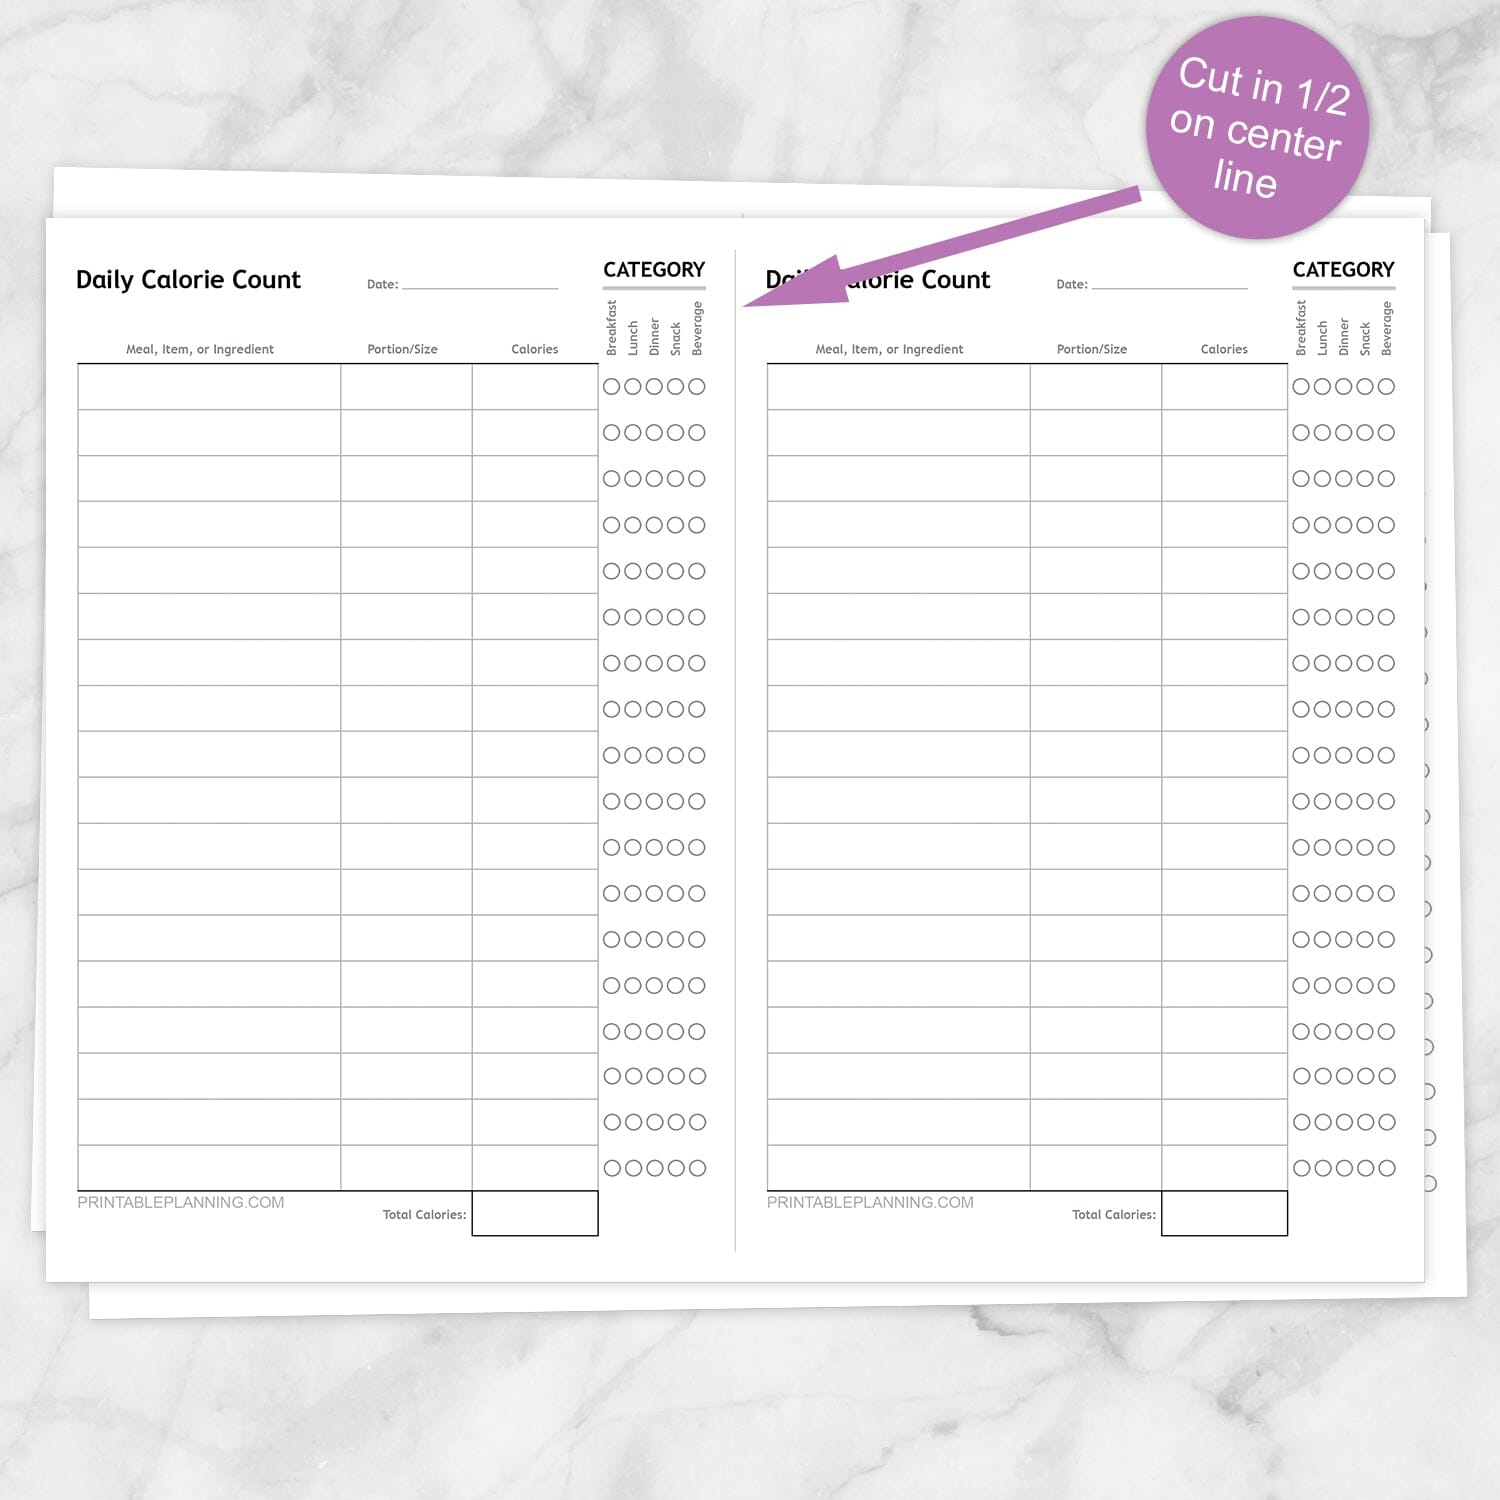 Printable Daily Calorie Count Sheet, Half Page, 2 per page, at Printable Planning. Infographic explains you cut the sheet in half along the center line.